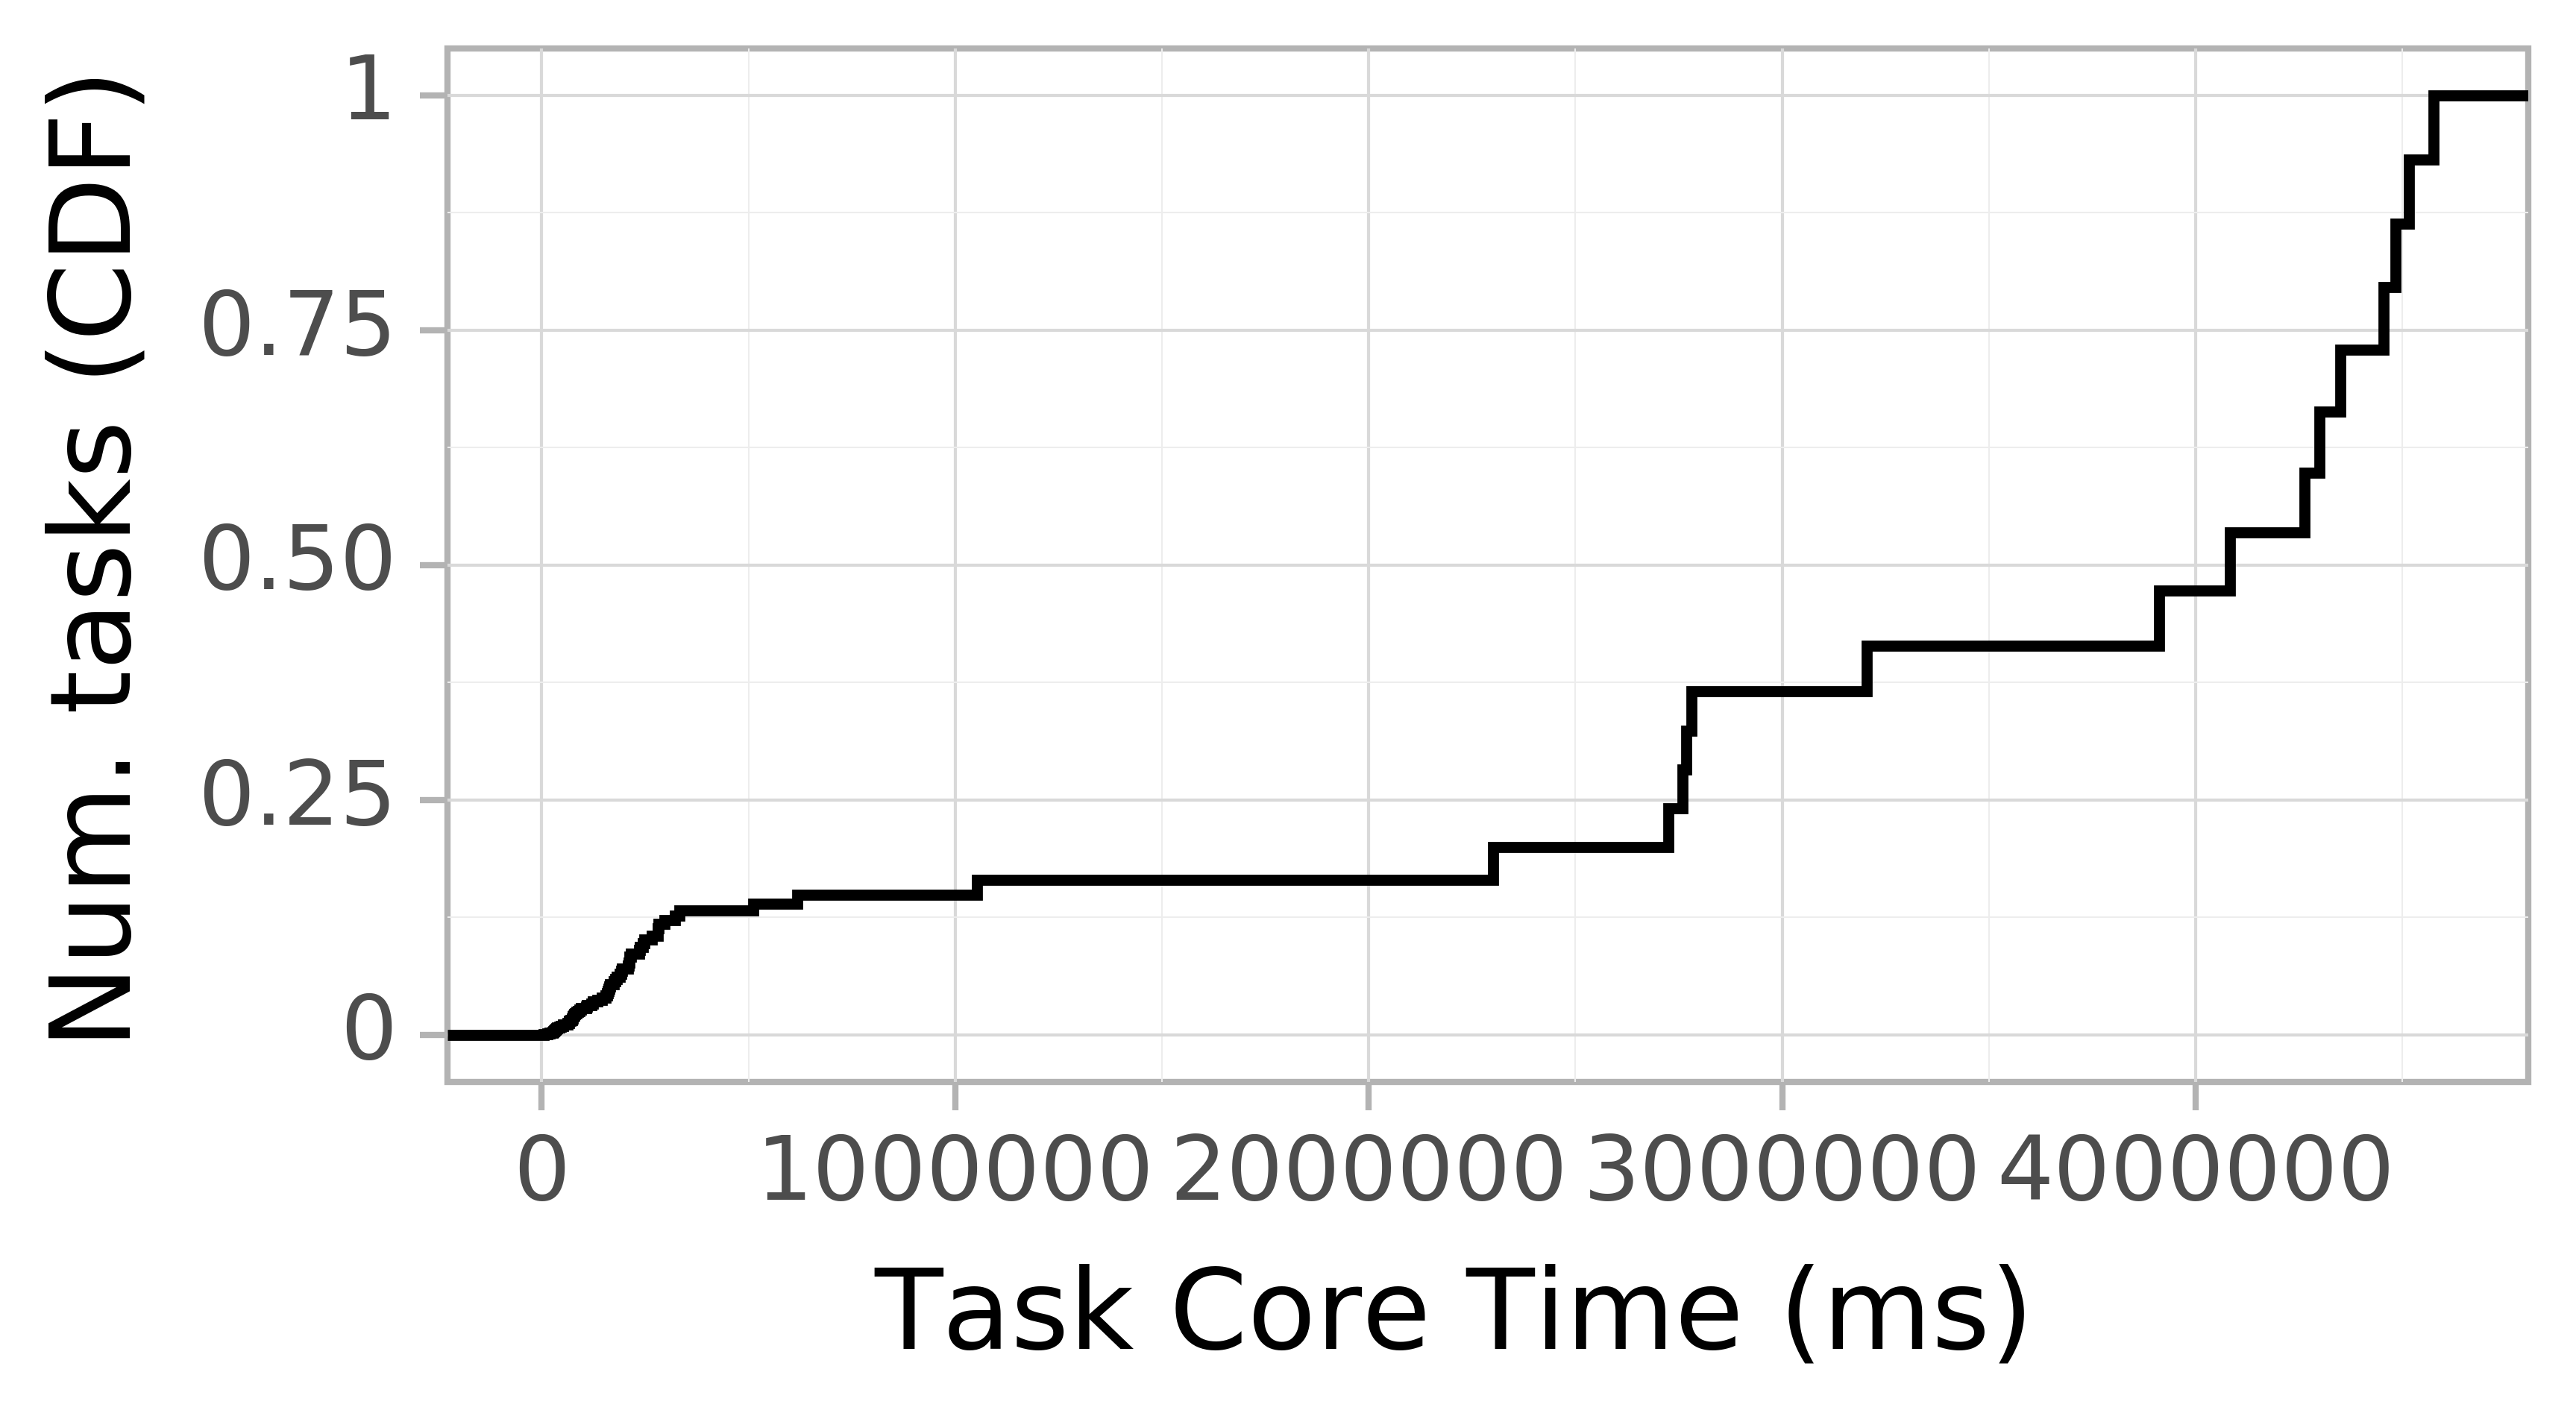 task resource time CDF graph for the Pegasus_P5 trace.